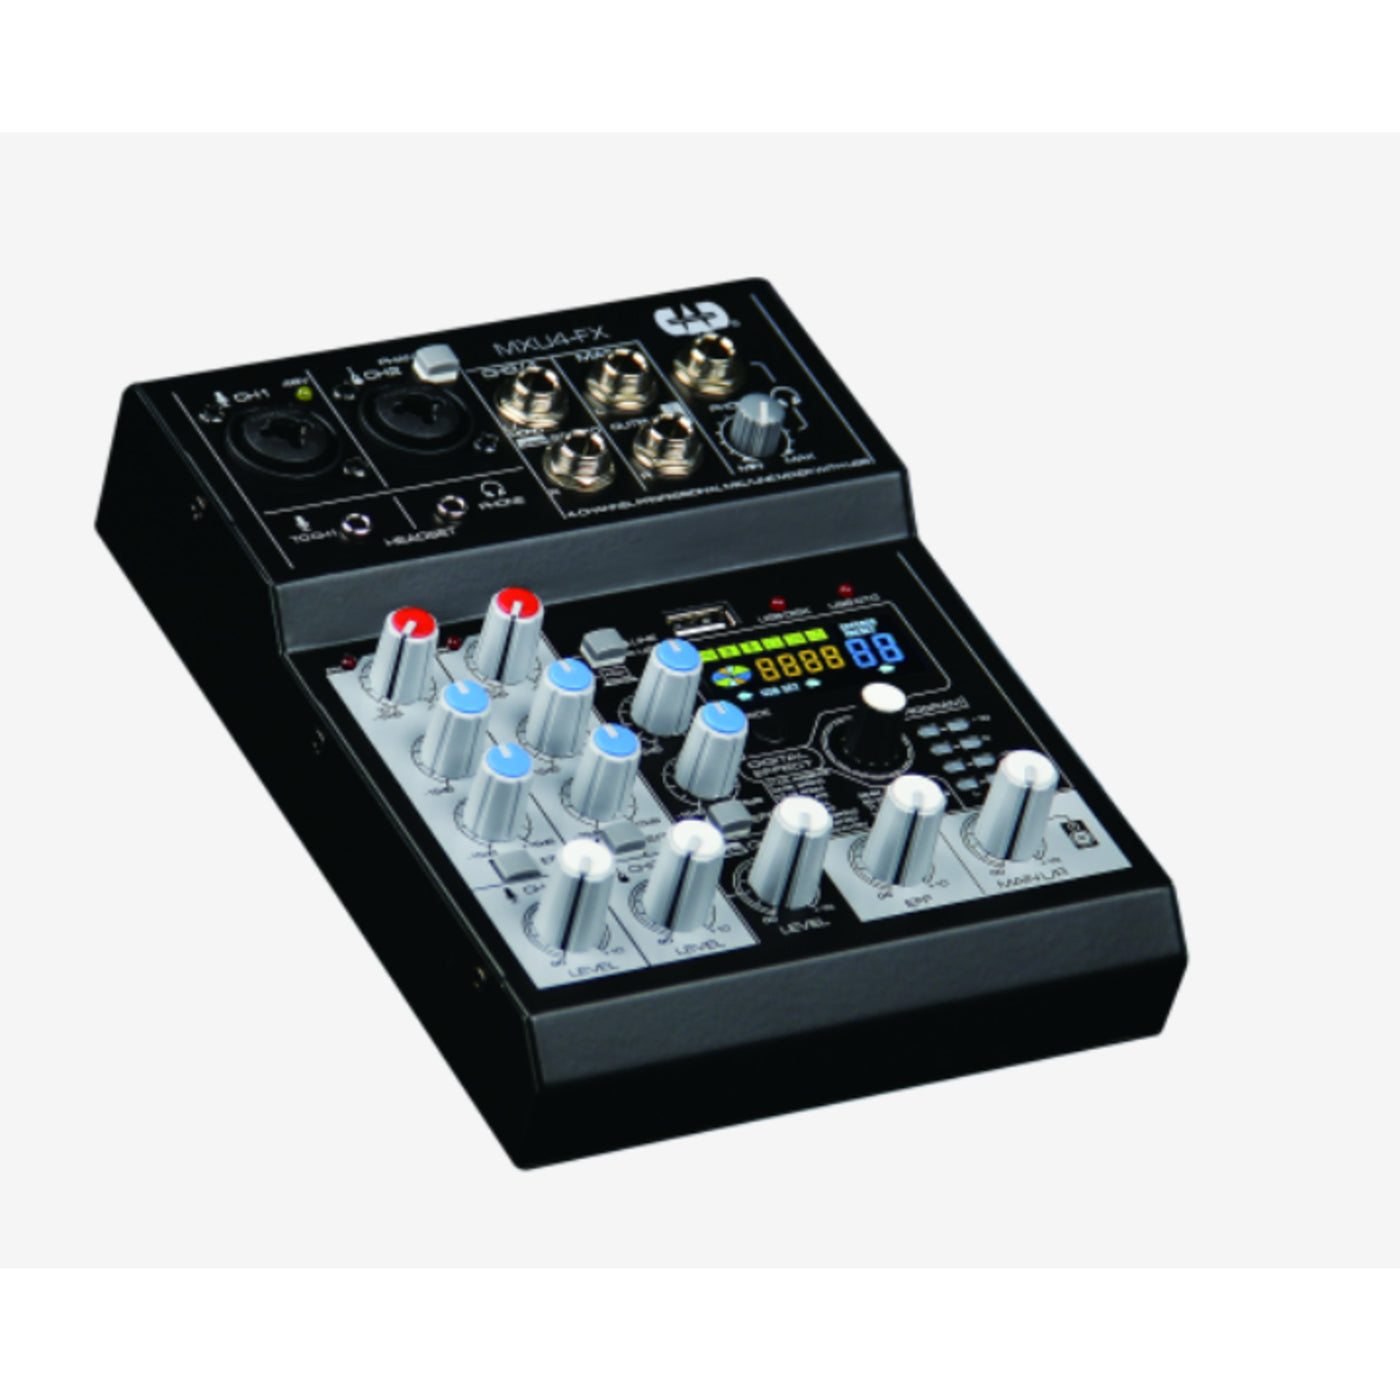 CAD Audio MXU4-FX 4 Channel Mixer with USB Interface and Digital Effects (MXU4-FX)